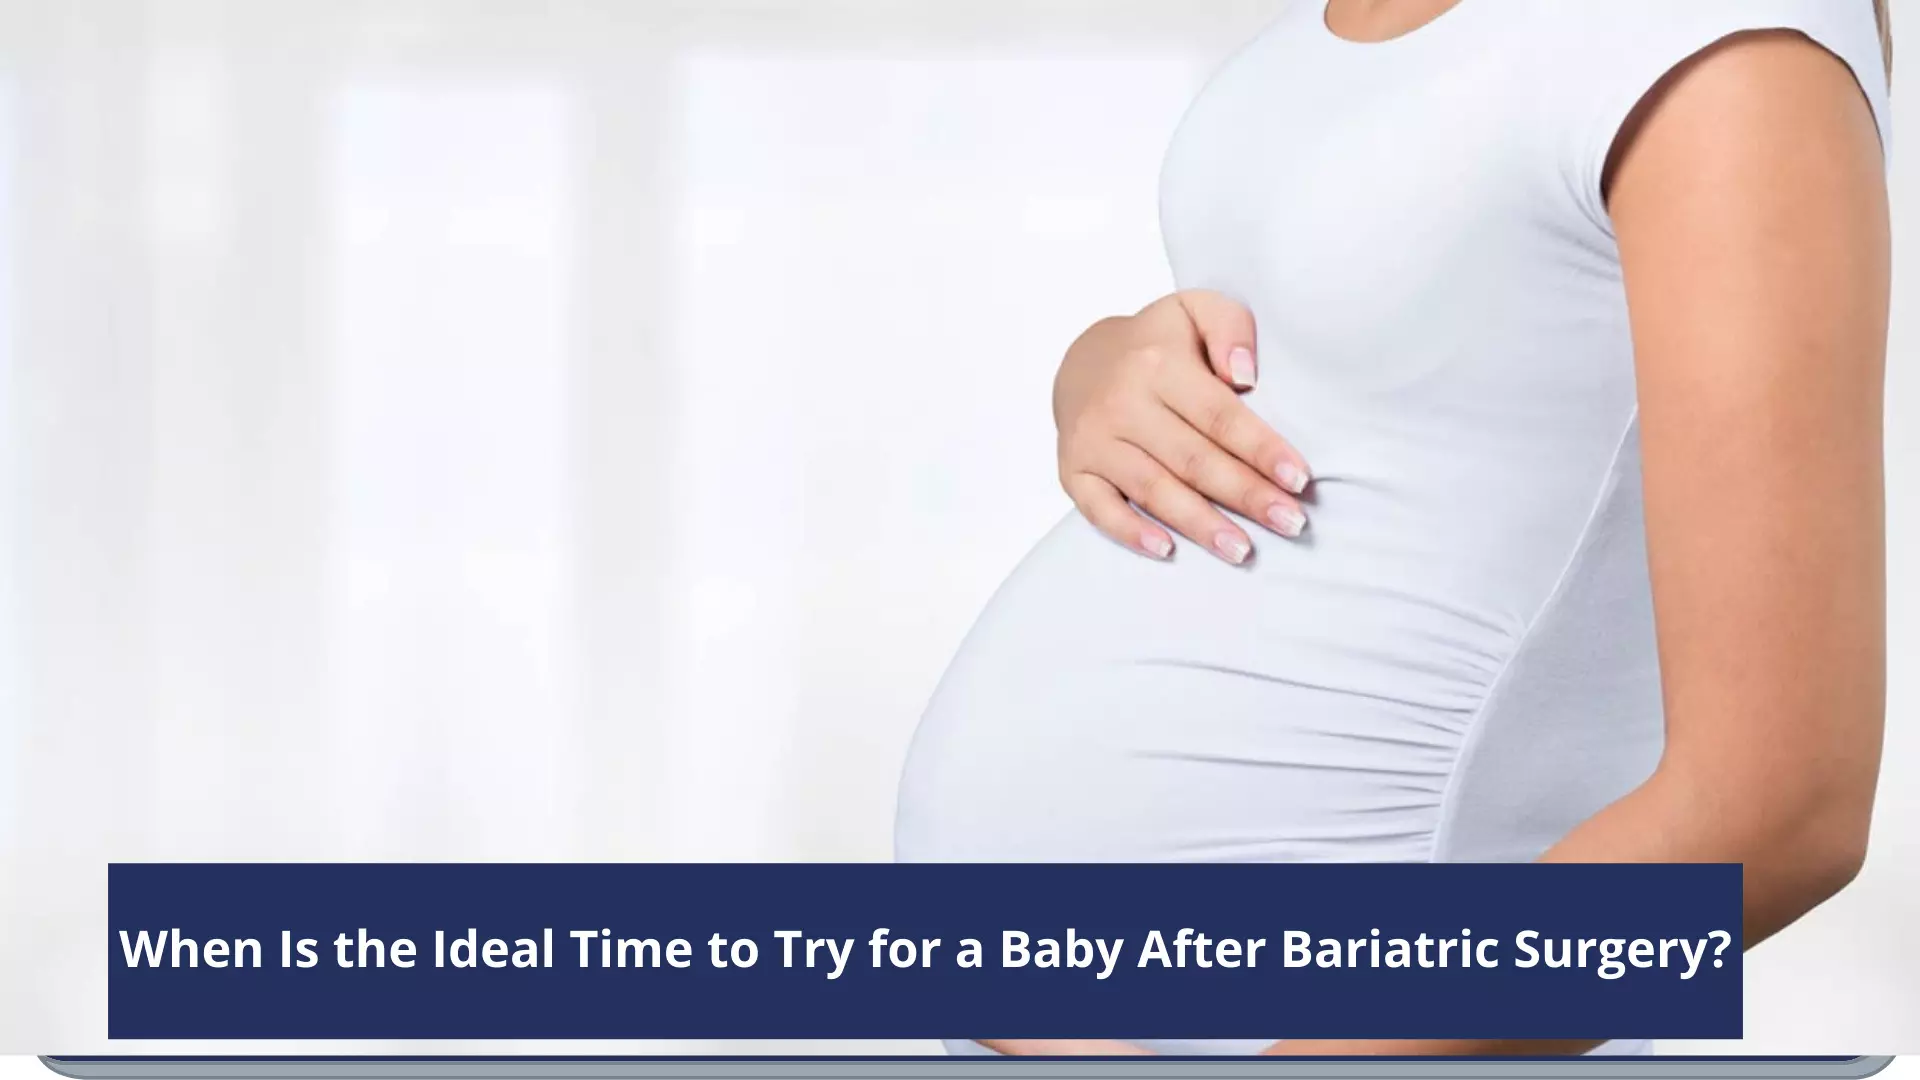 Is there an Ideal Time to Try for a Baby After Bariatric Surgery?